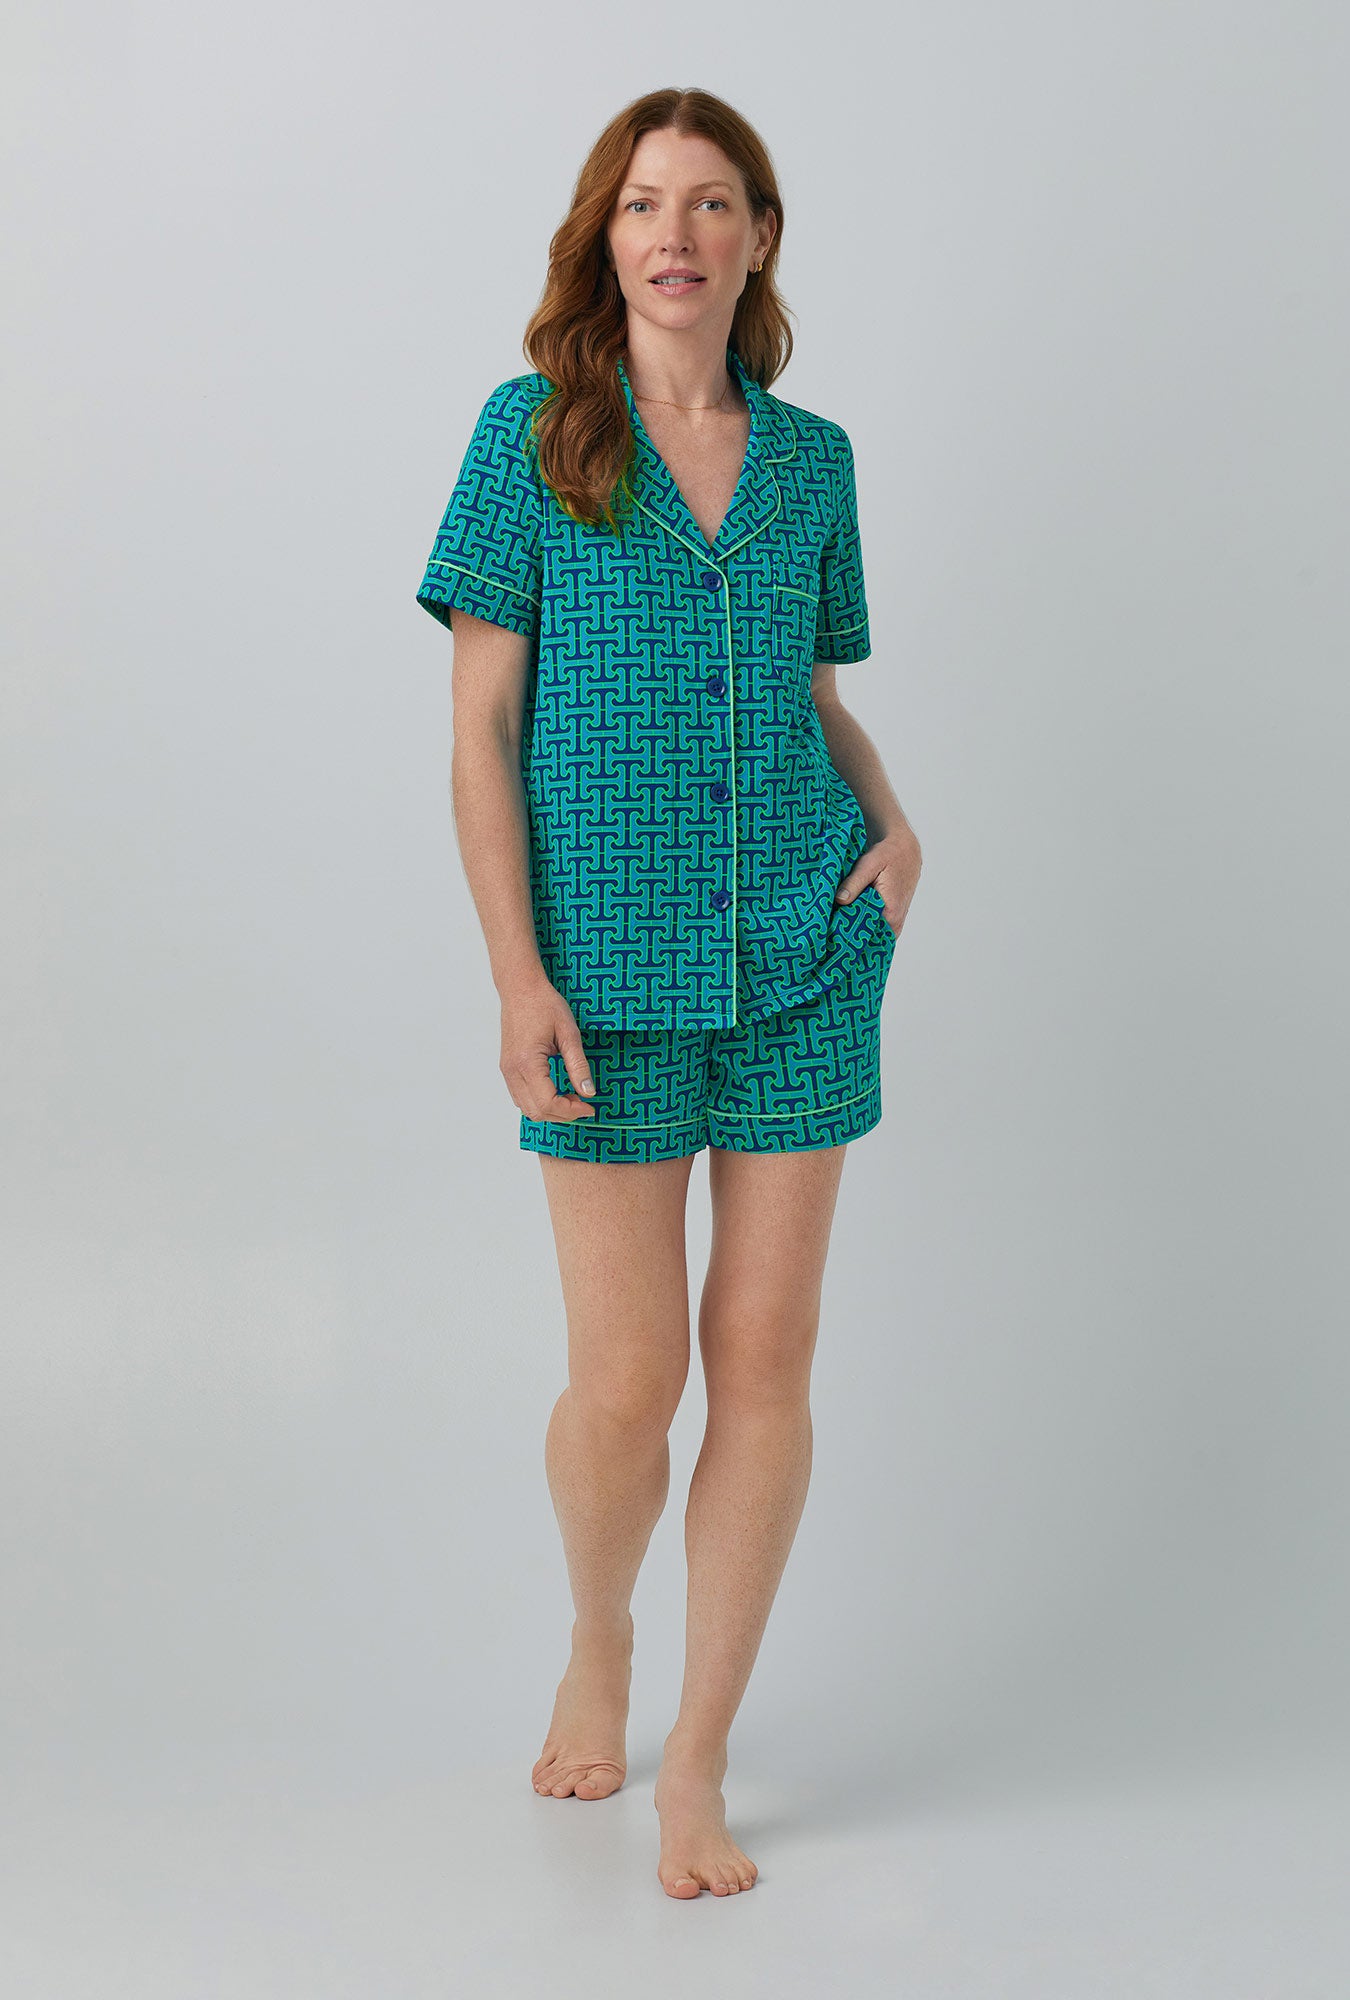 A lady wearing  Short Sleeve Classic Shorty Stretch Jersey PJ Set with Blue Tile  print